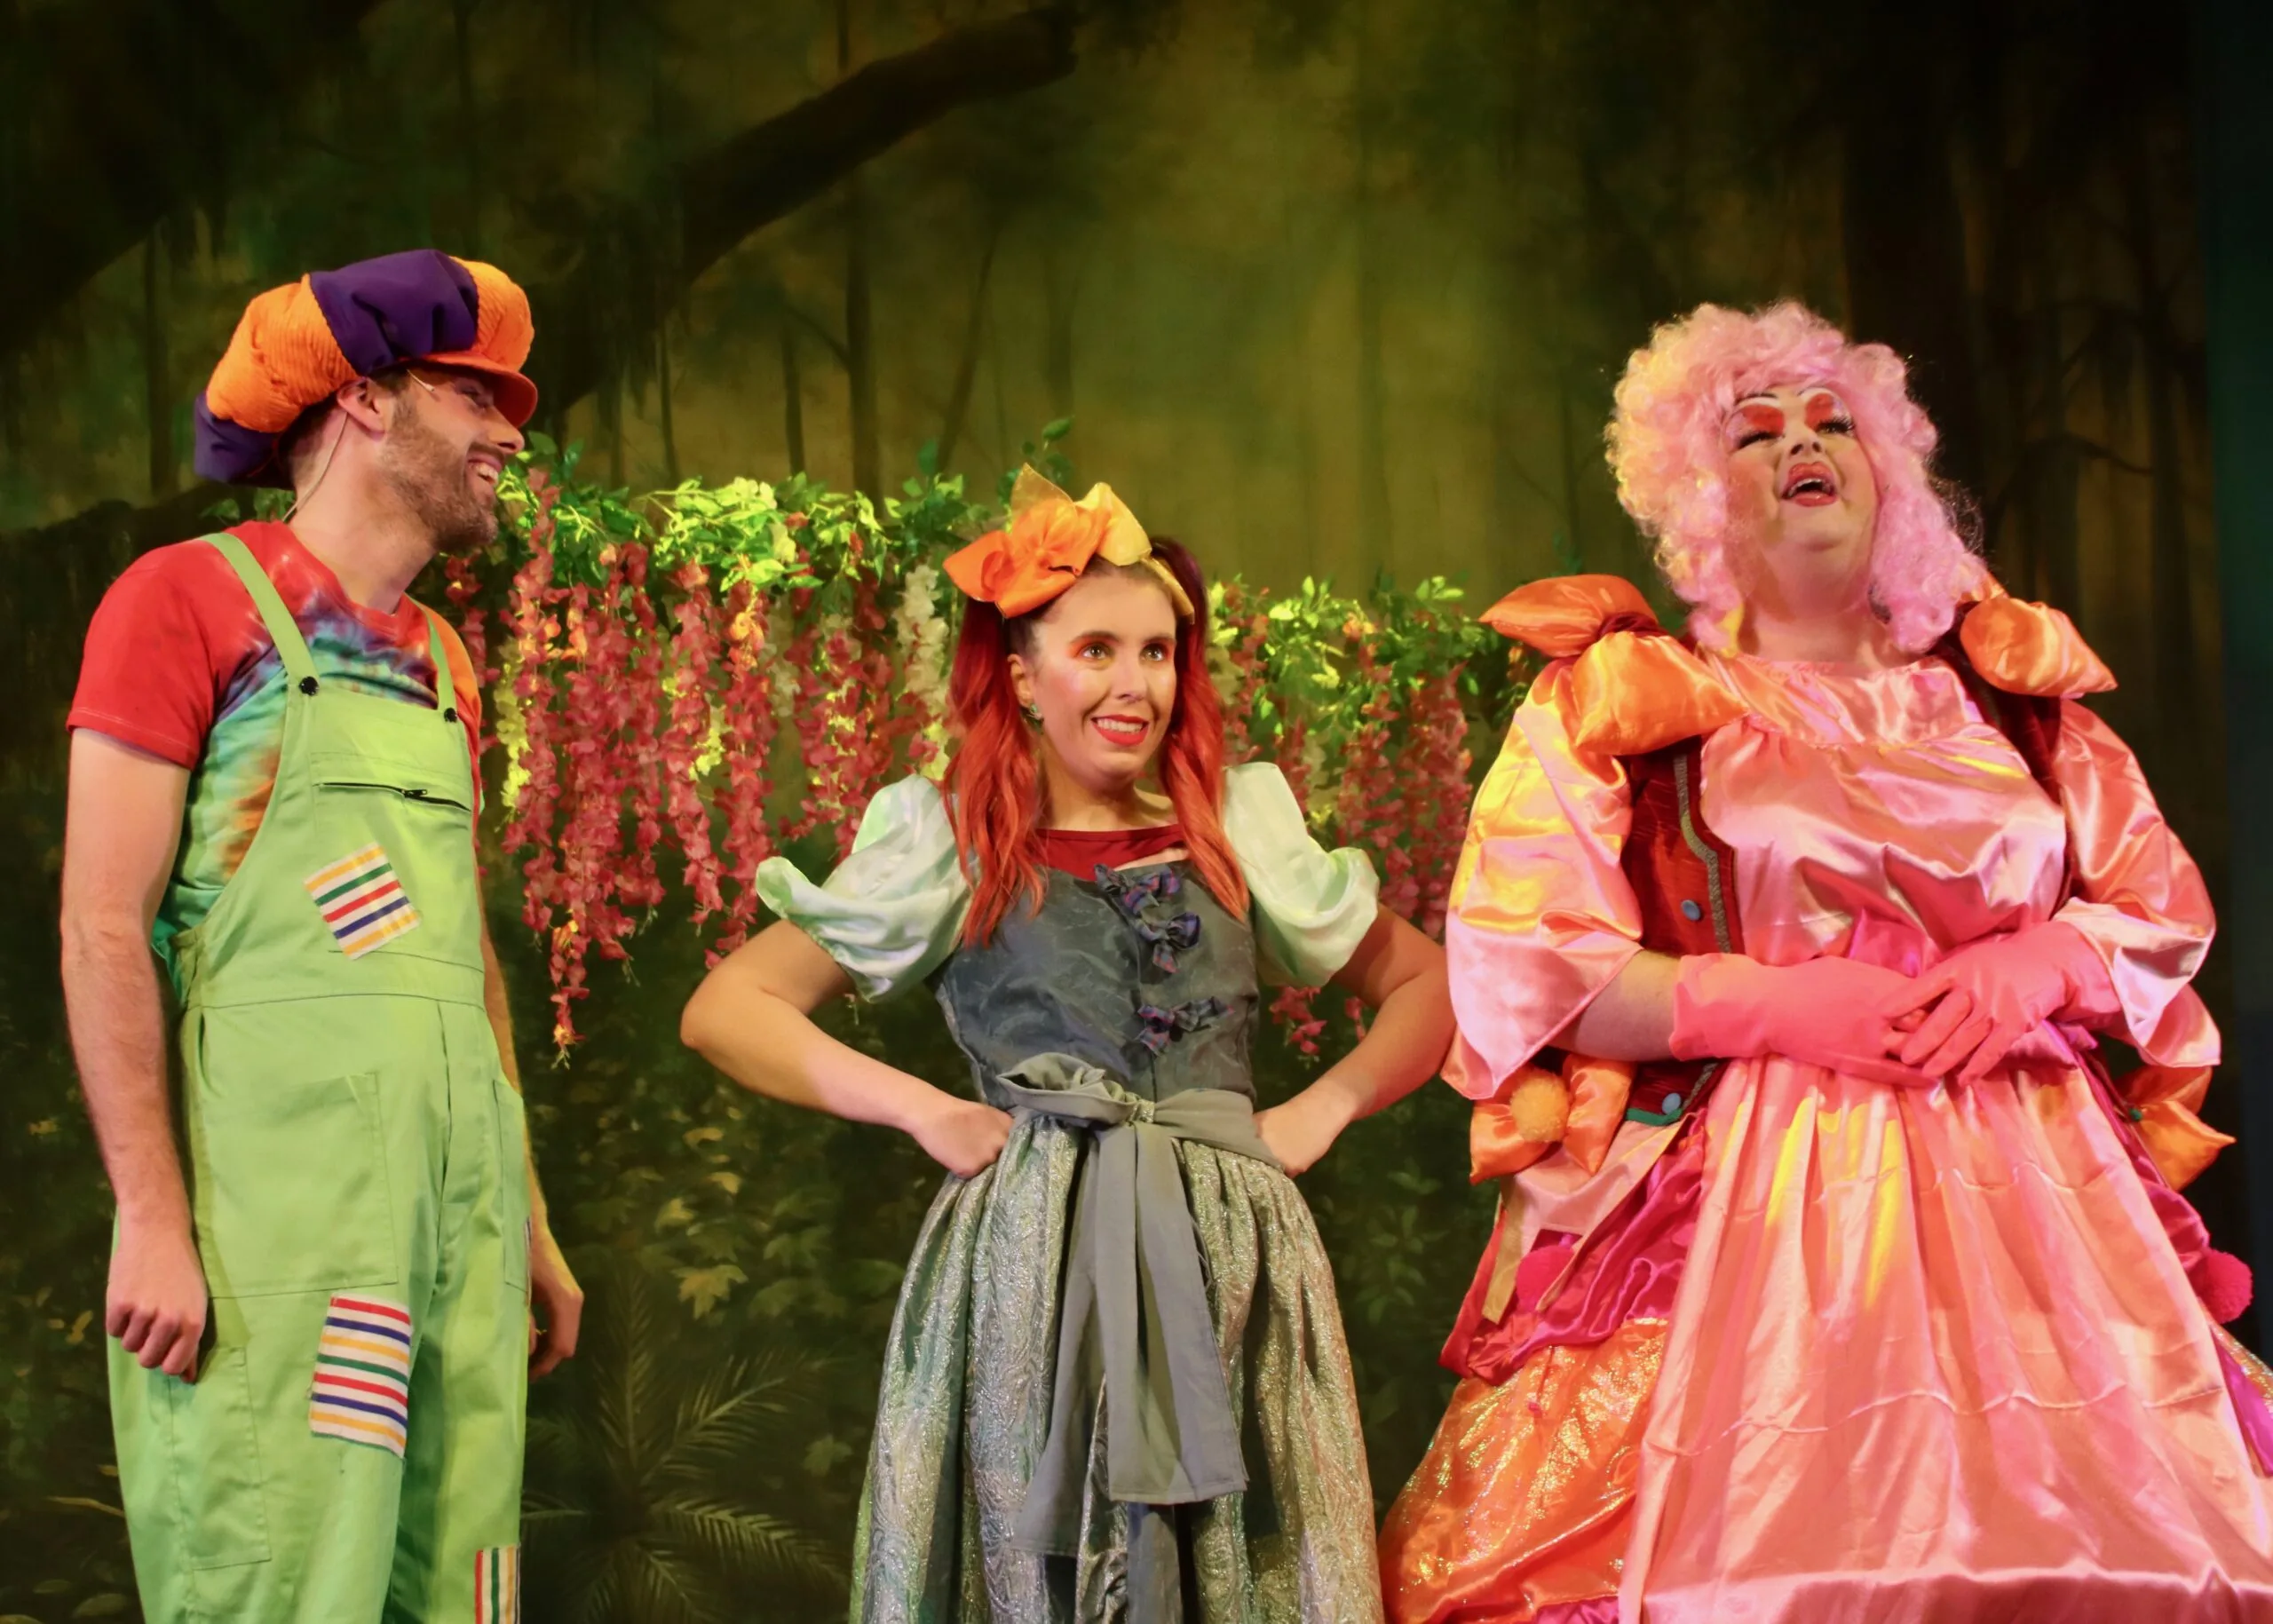 Panto Special – Writing Once Upon a Time in Pantoland